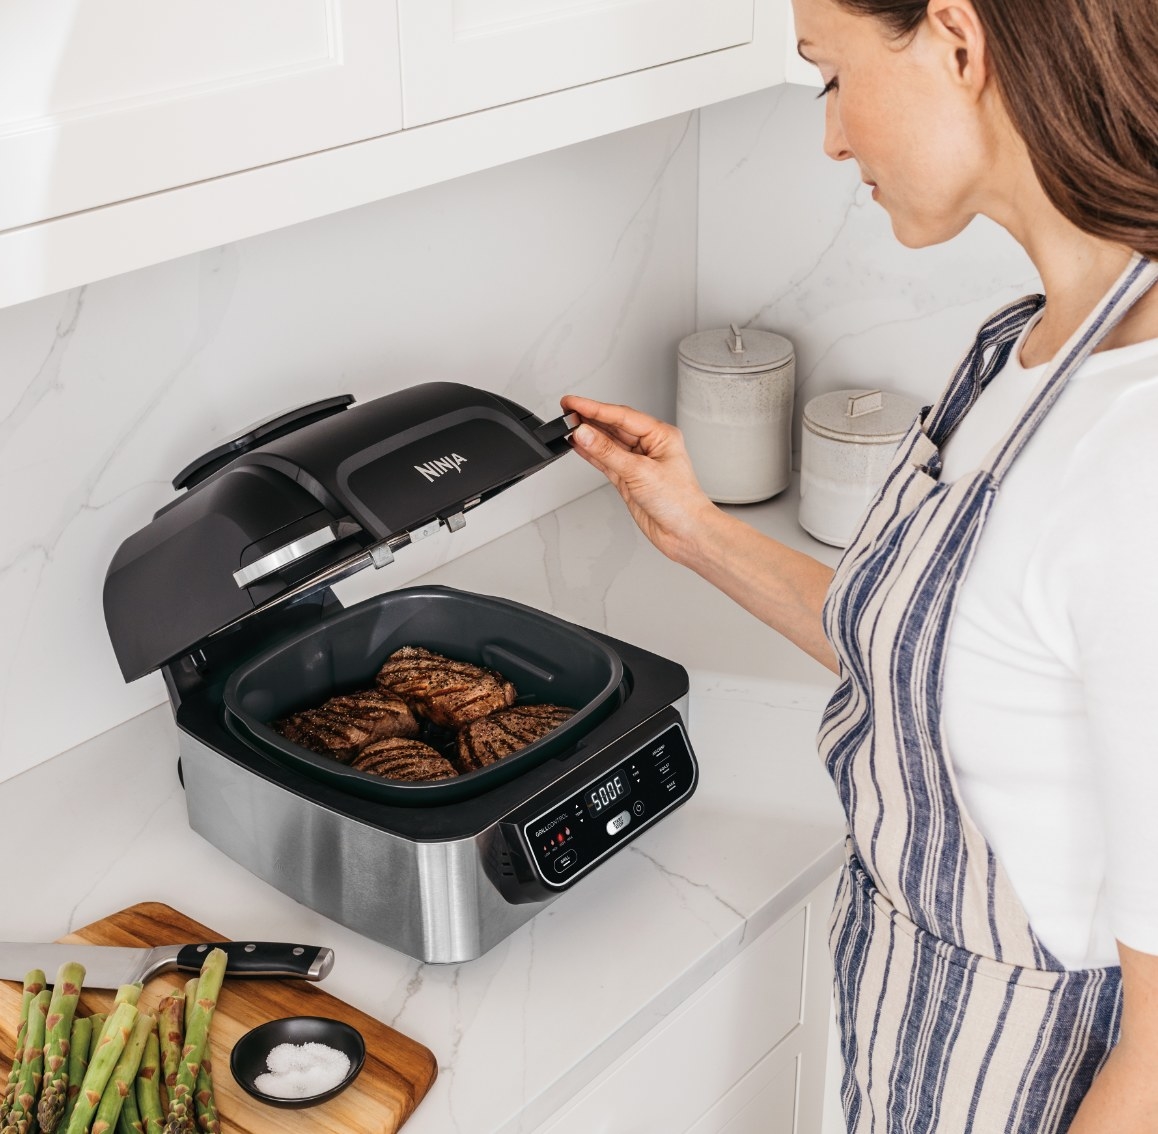 The 4-in-1 indoor grill